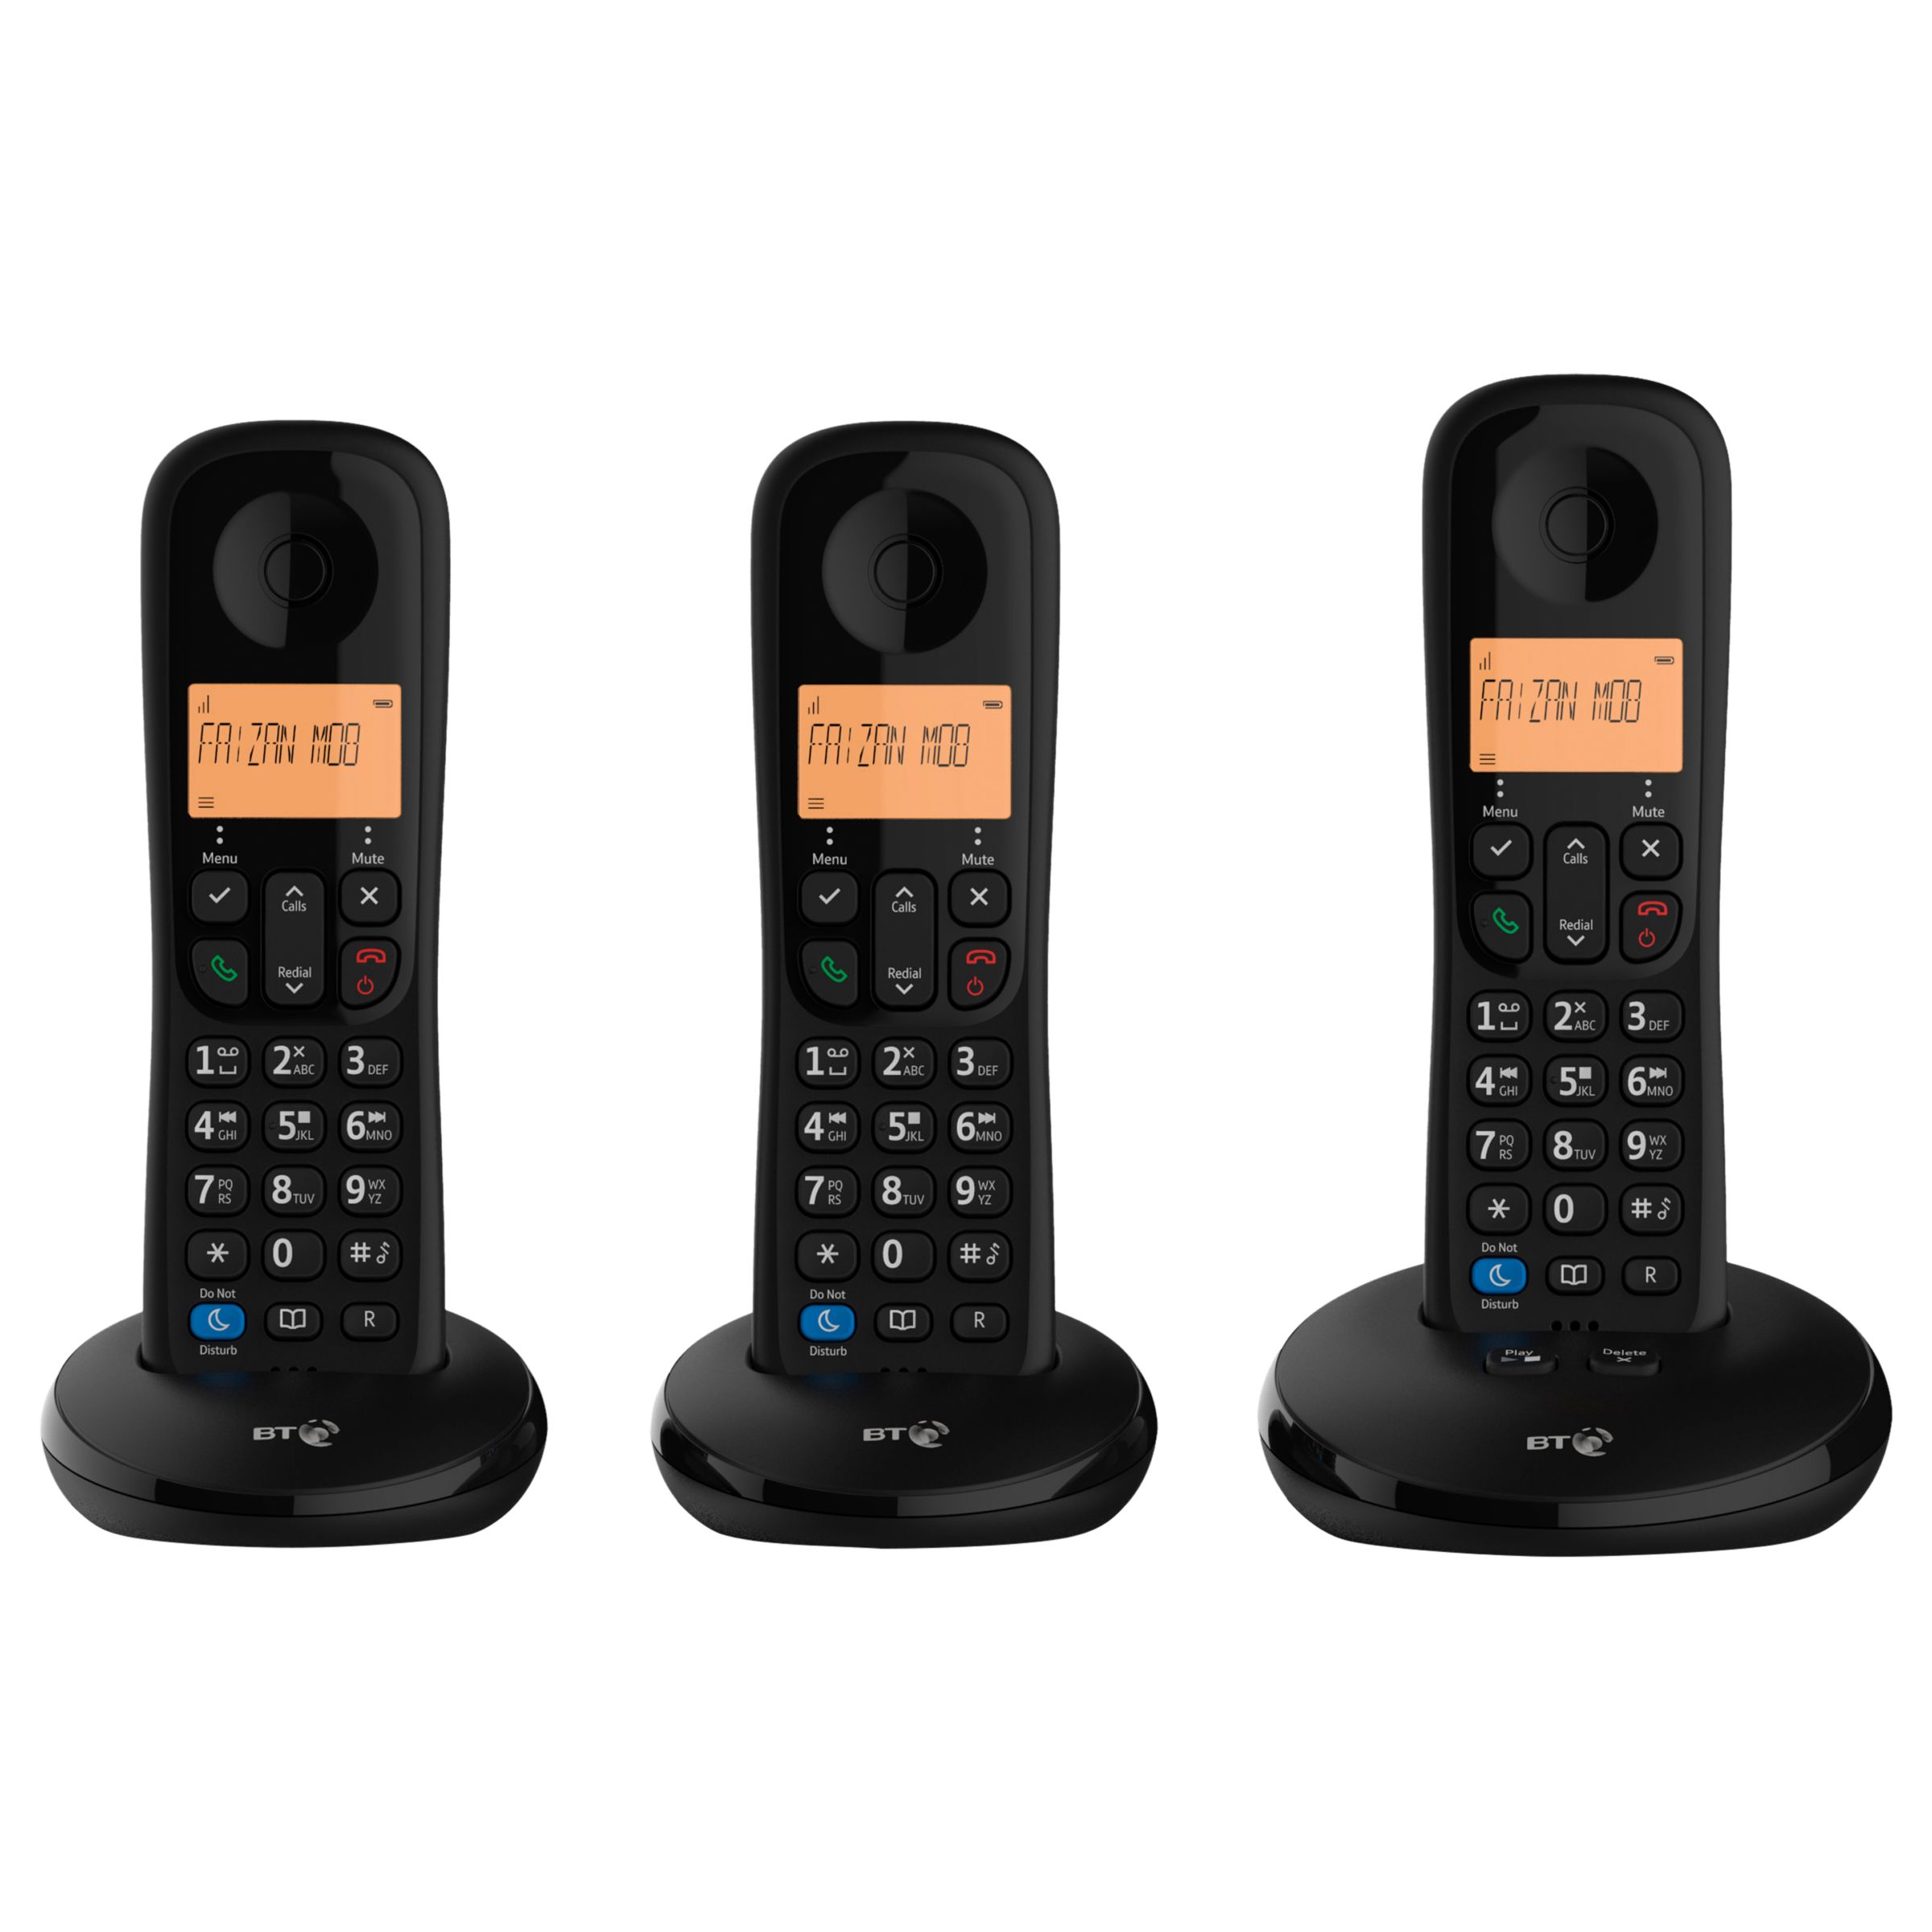 BT Everyday Phone Digital Cordless Phone with Nuisance Call Blocking & Answering Machine, Trio DECT Review thumbnail